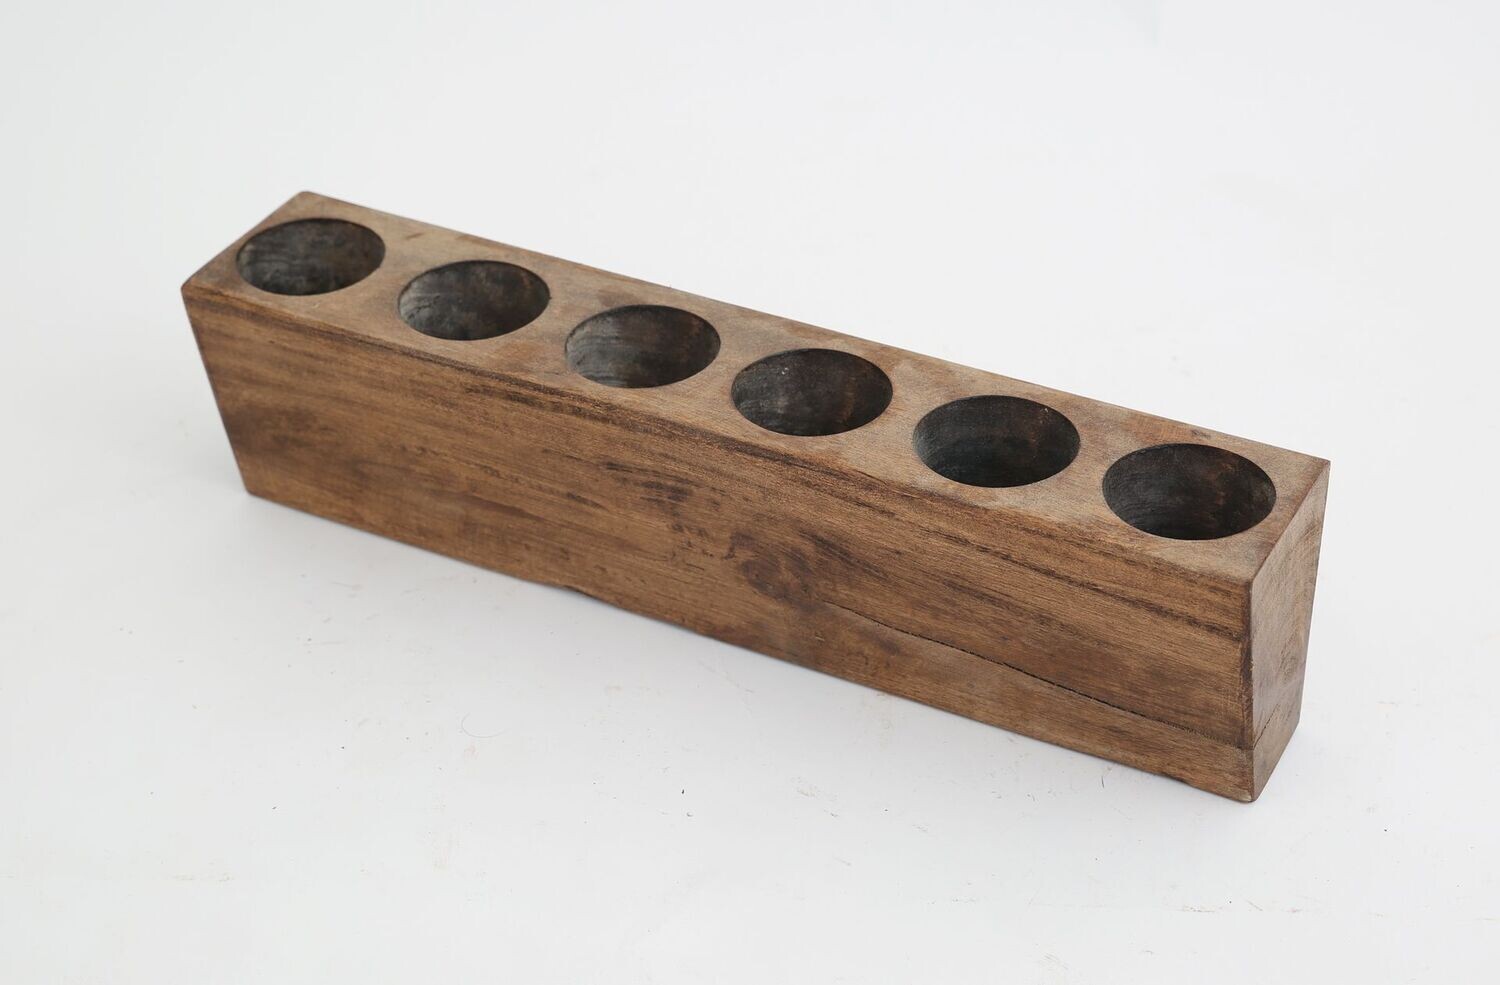 Rustic Sugar Mold-6 Hole-Rustic-Reproduction-Gorgeous-19 inches Long-Waxed